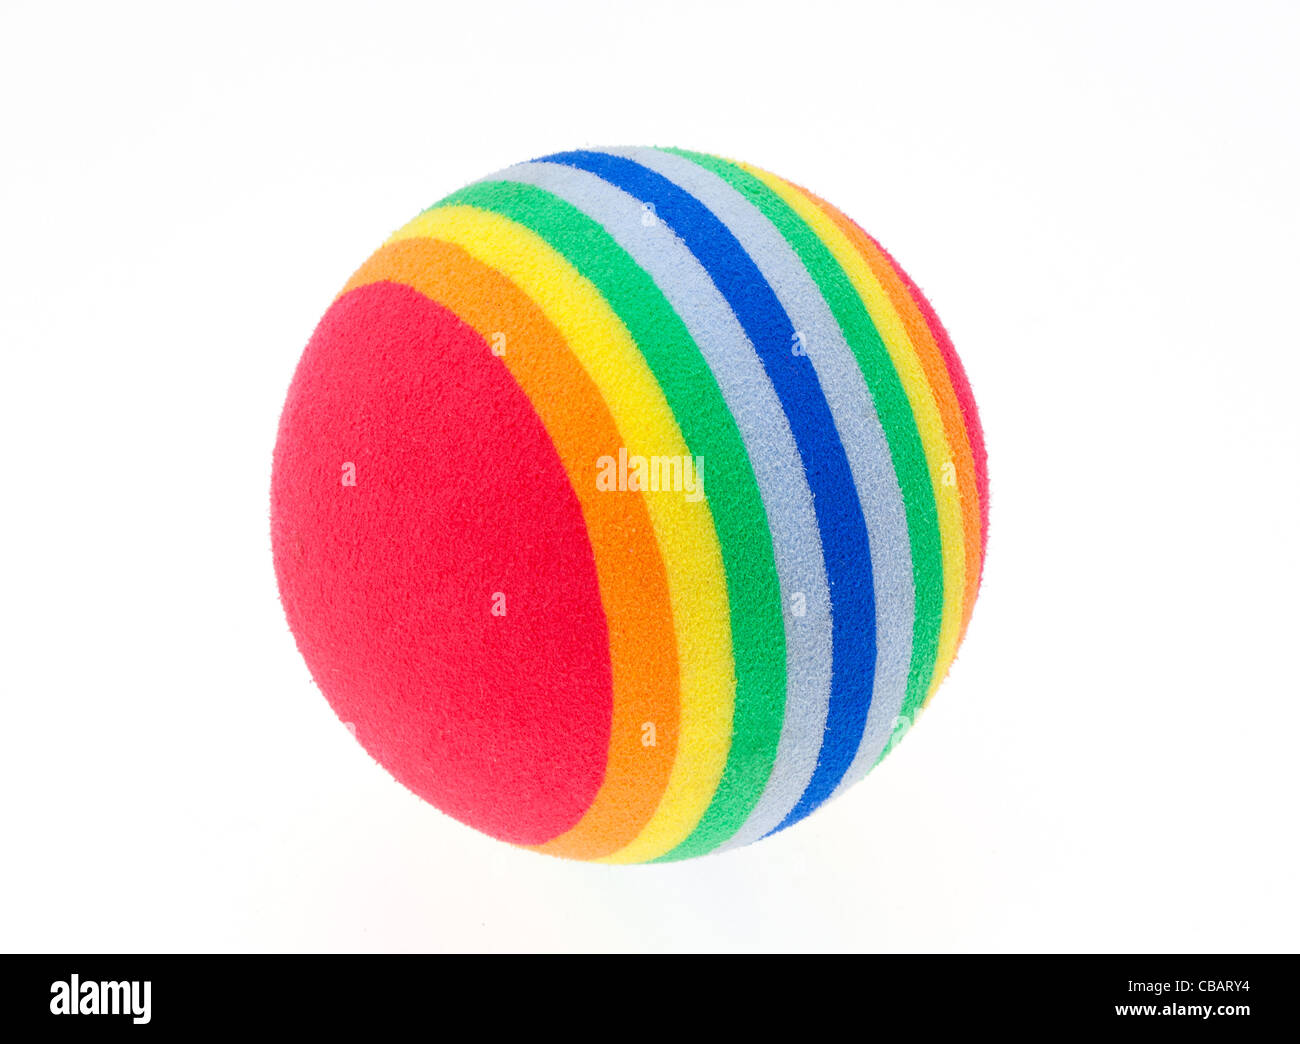 Close-up of a child's multi-coloured soft play ball isolated against a white background. Stock Photo